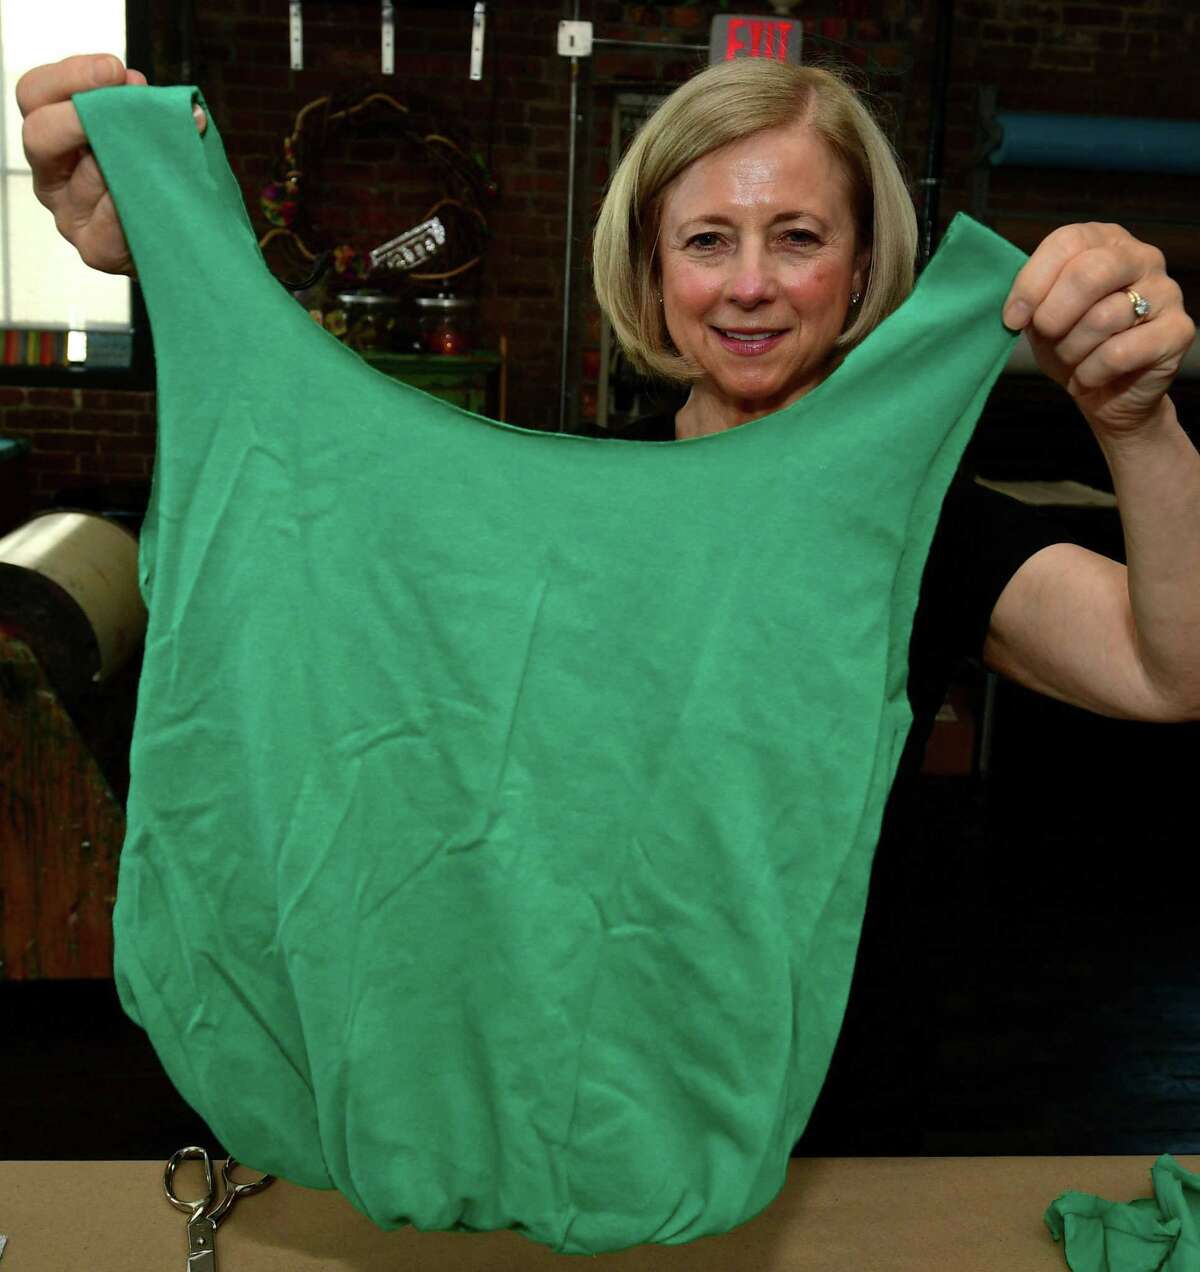 Skip the Plastic Norwalk founder Betty Ball and Junior Art and Music host a workshop, DIY T-Shirt Tote Bag, to make reusable bags out of t-shirts Saturday, June 22, 2019, at the JAM studios in Liberty Square in Norwalk, Conn.